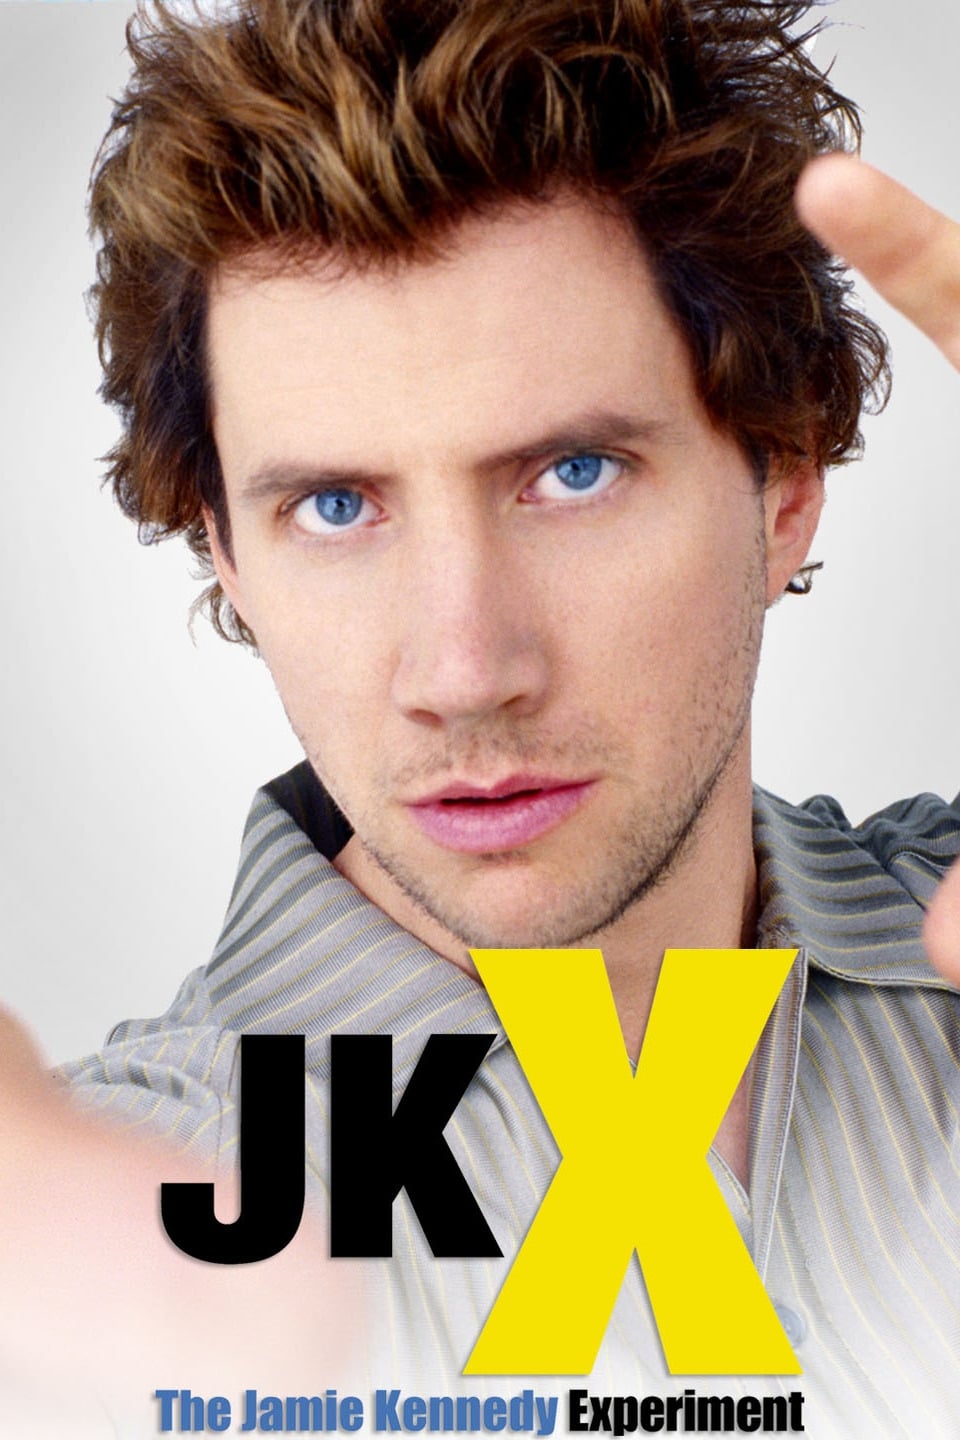 The Jamie Kennedy Experiment (2002)